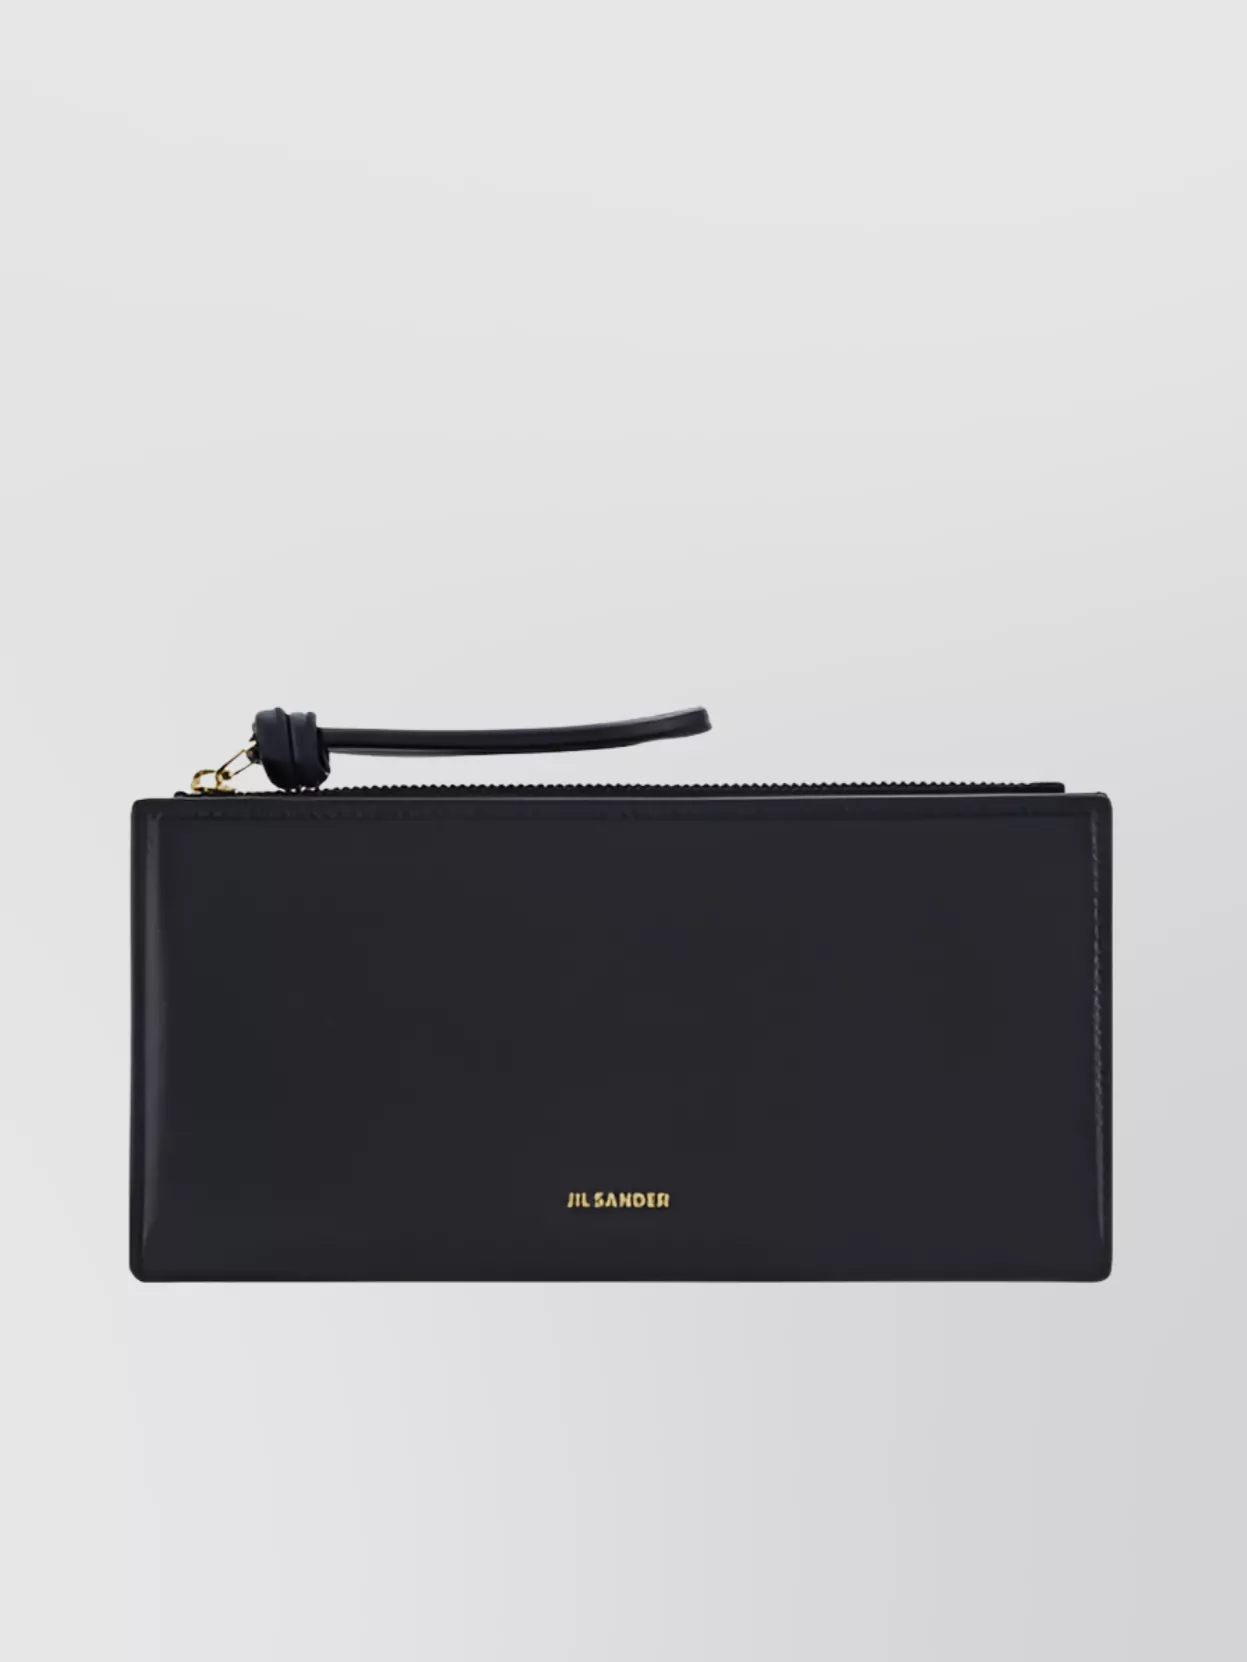 Shop Jil Sander Leather Wallet With Gold Hardware And Wrist Strap